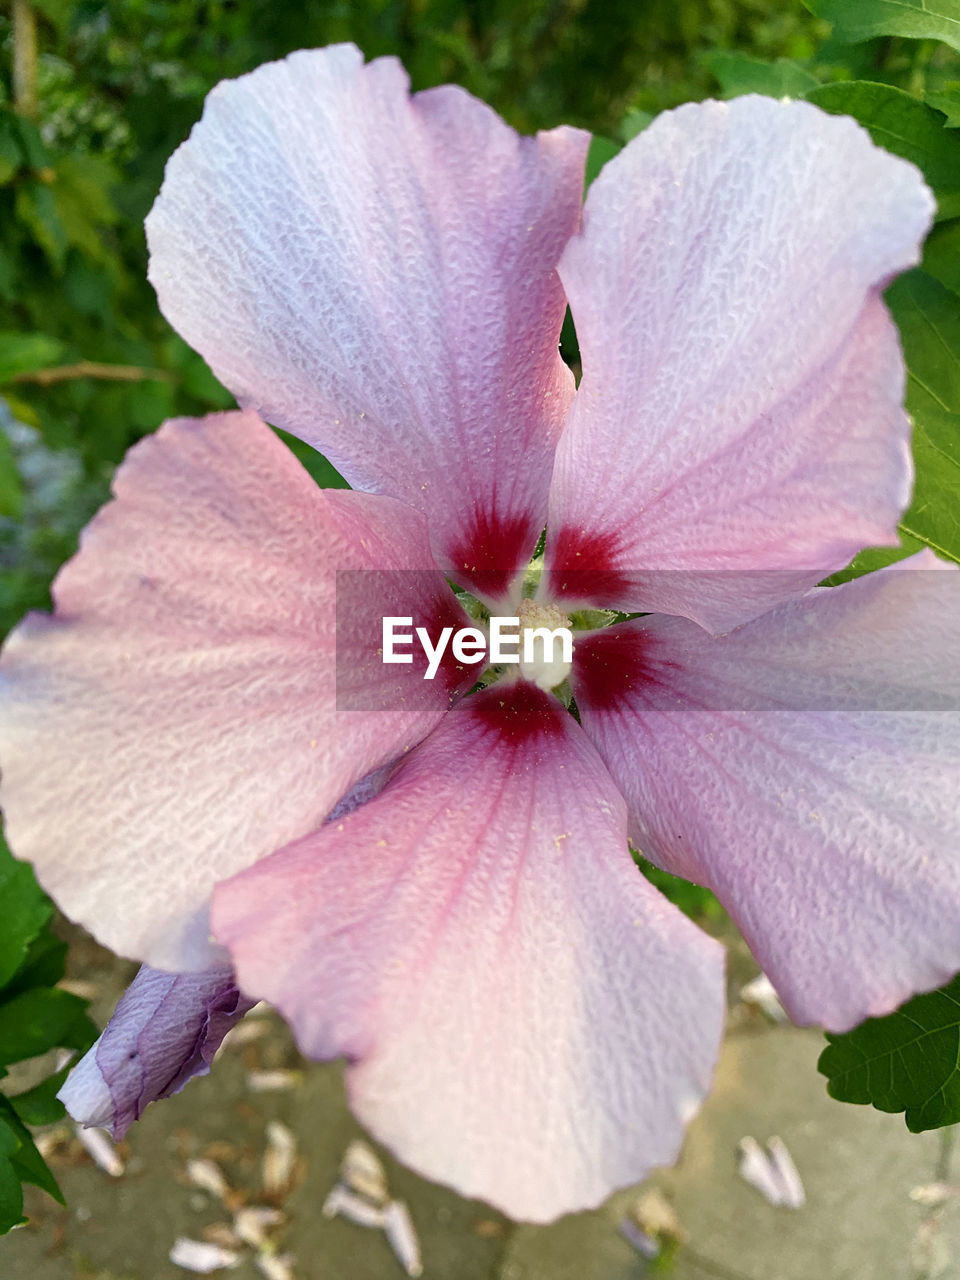 flower, flowering plant, plant, freshness, fragility, beauty in nature, petal, inflorescence, flower head, close-up, growth, pollen, nature, pink, no people, stamen, hibiscus, botany, day, focus on foreground, outdoors, blossom, springtime